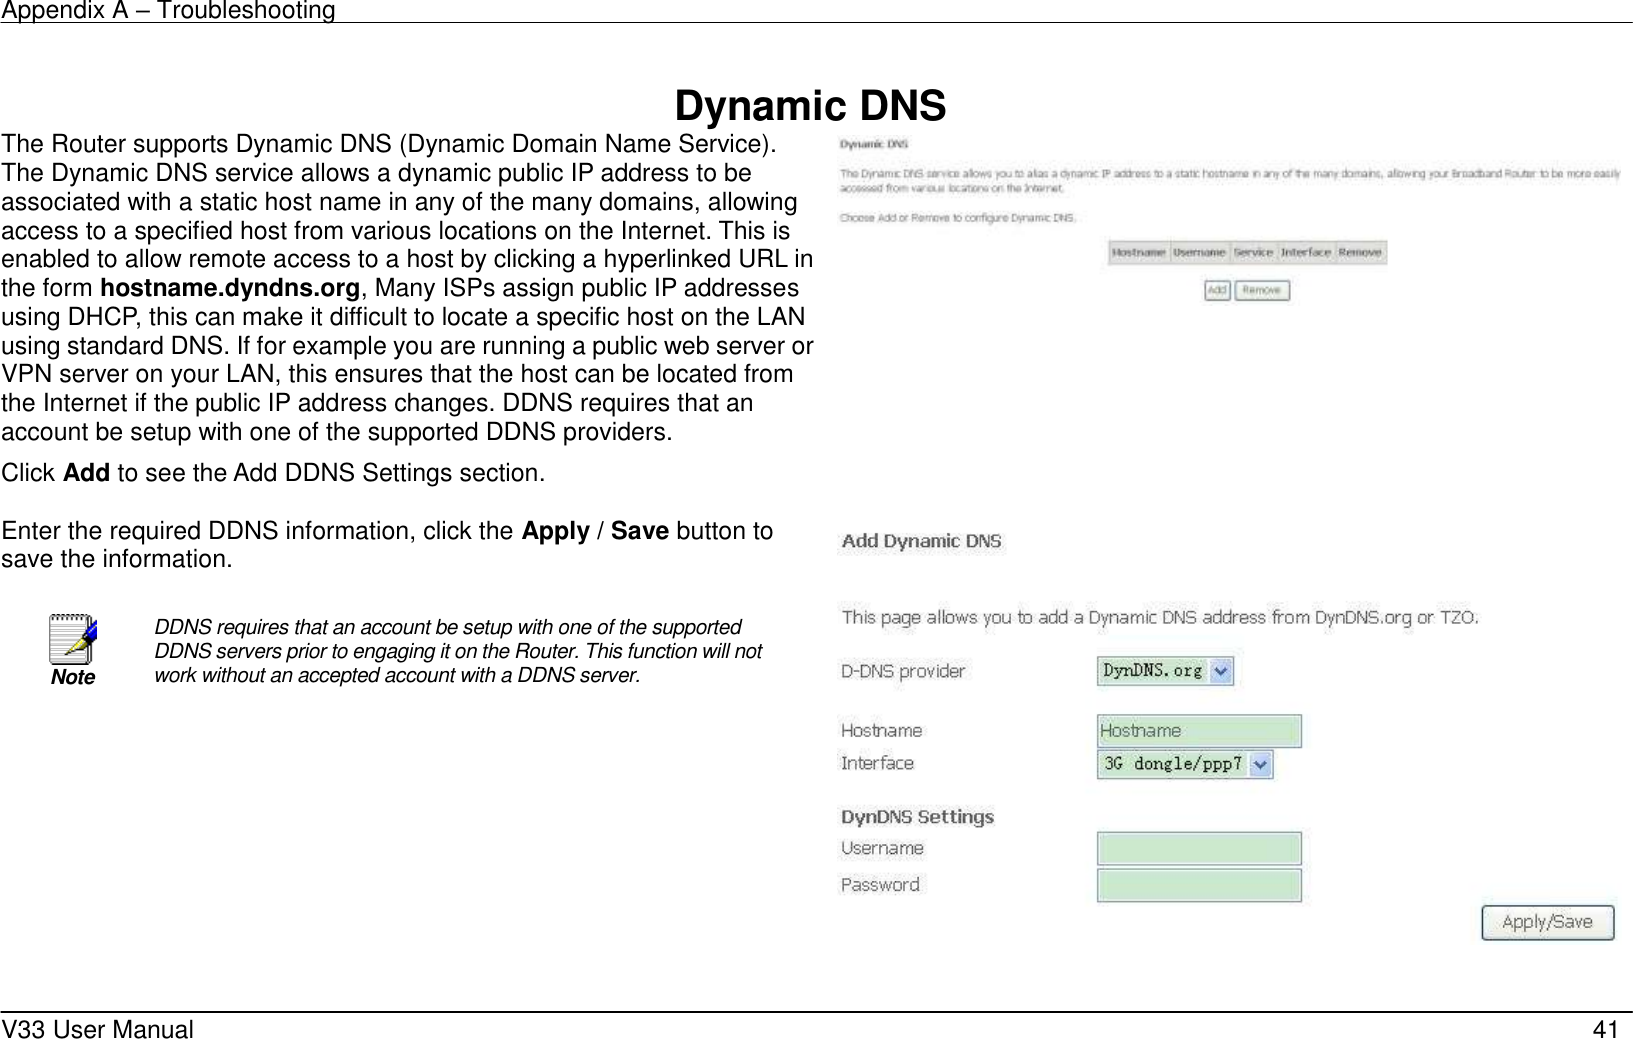 Appendix A – Troubleshooting    V33 User Manual   41  Dynamic DNS The Router supports Dynamic DNS (Dynamic Domain Name Service). The Dynamic DNS service allows a dynamic public IP address to be associated with a static host name in any of the many domains, allowing access to a specified host from various locations on the Internet. This is enabled to allow remote access to a host by clicking a hyperlinked URL in the form hostname.dyndns.org, Many ISPs assign public IP addresses using DHCP, this can make it difficult to locate a specific host on the LAN using standard DNS. If for example you are running a public web server or VPN server on your LAN, this ensures that the host can be located from the Internet if the public IP address changes. DDNS requires that an account be setup with one of the supported DDNS providers. Click Add to see the Add DDNS Settings section.      Enter the required DDNS information, click the Apply / Save button to save the information.   Note DDNS requires that an account be setup with one of the supported DDNS servers prior to engaging it on the Router. This function will not work without an accepted account with a DDNS server.    